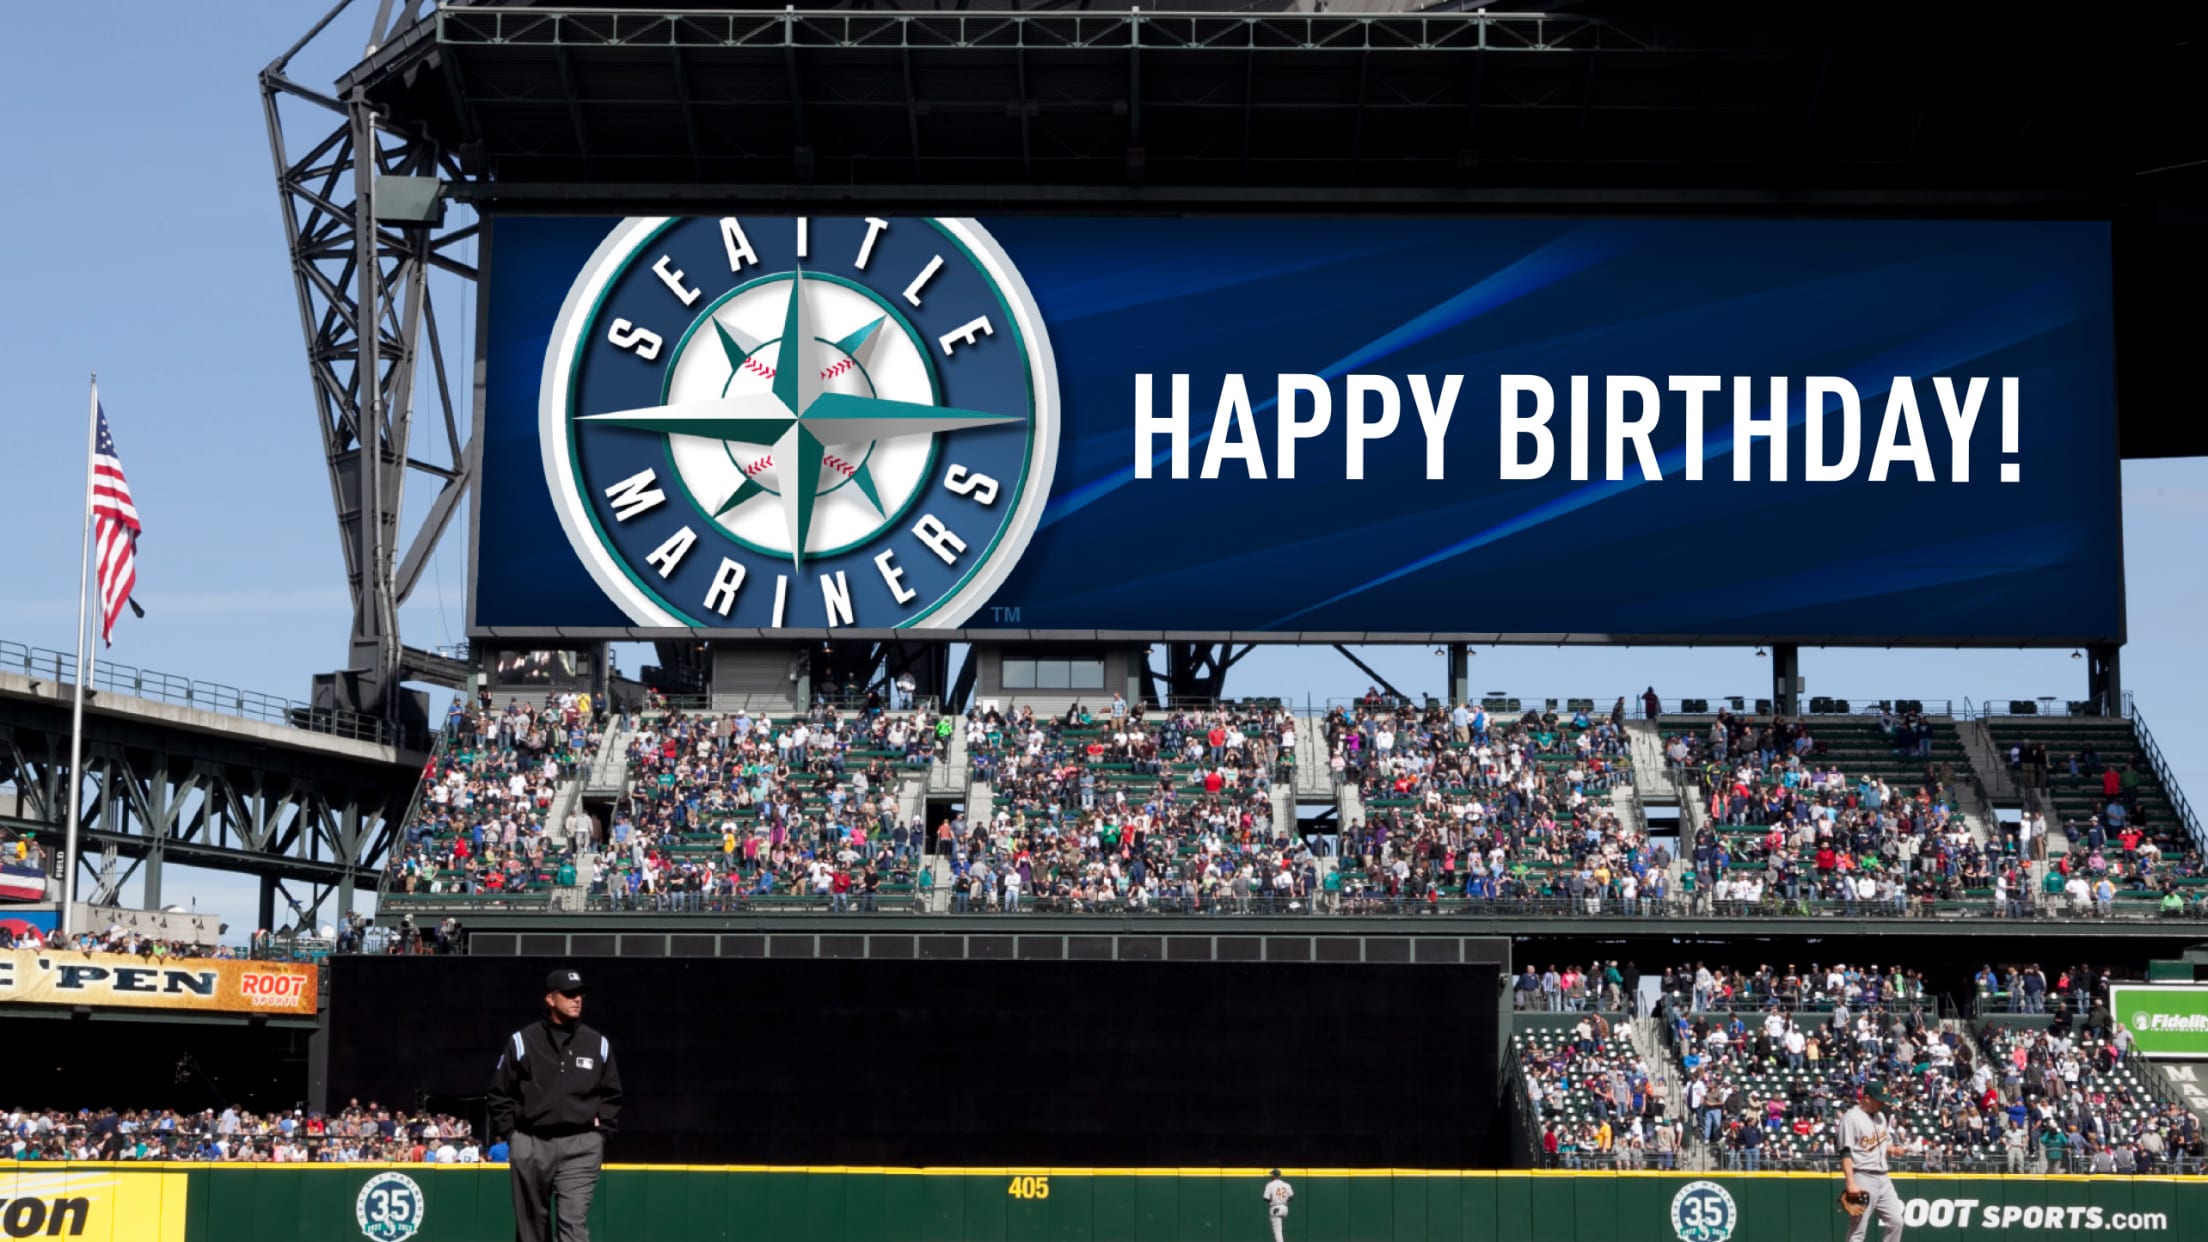 Circling Seattle Sports] Let's all wish a very HAPPY BIRTHDAY to